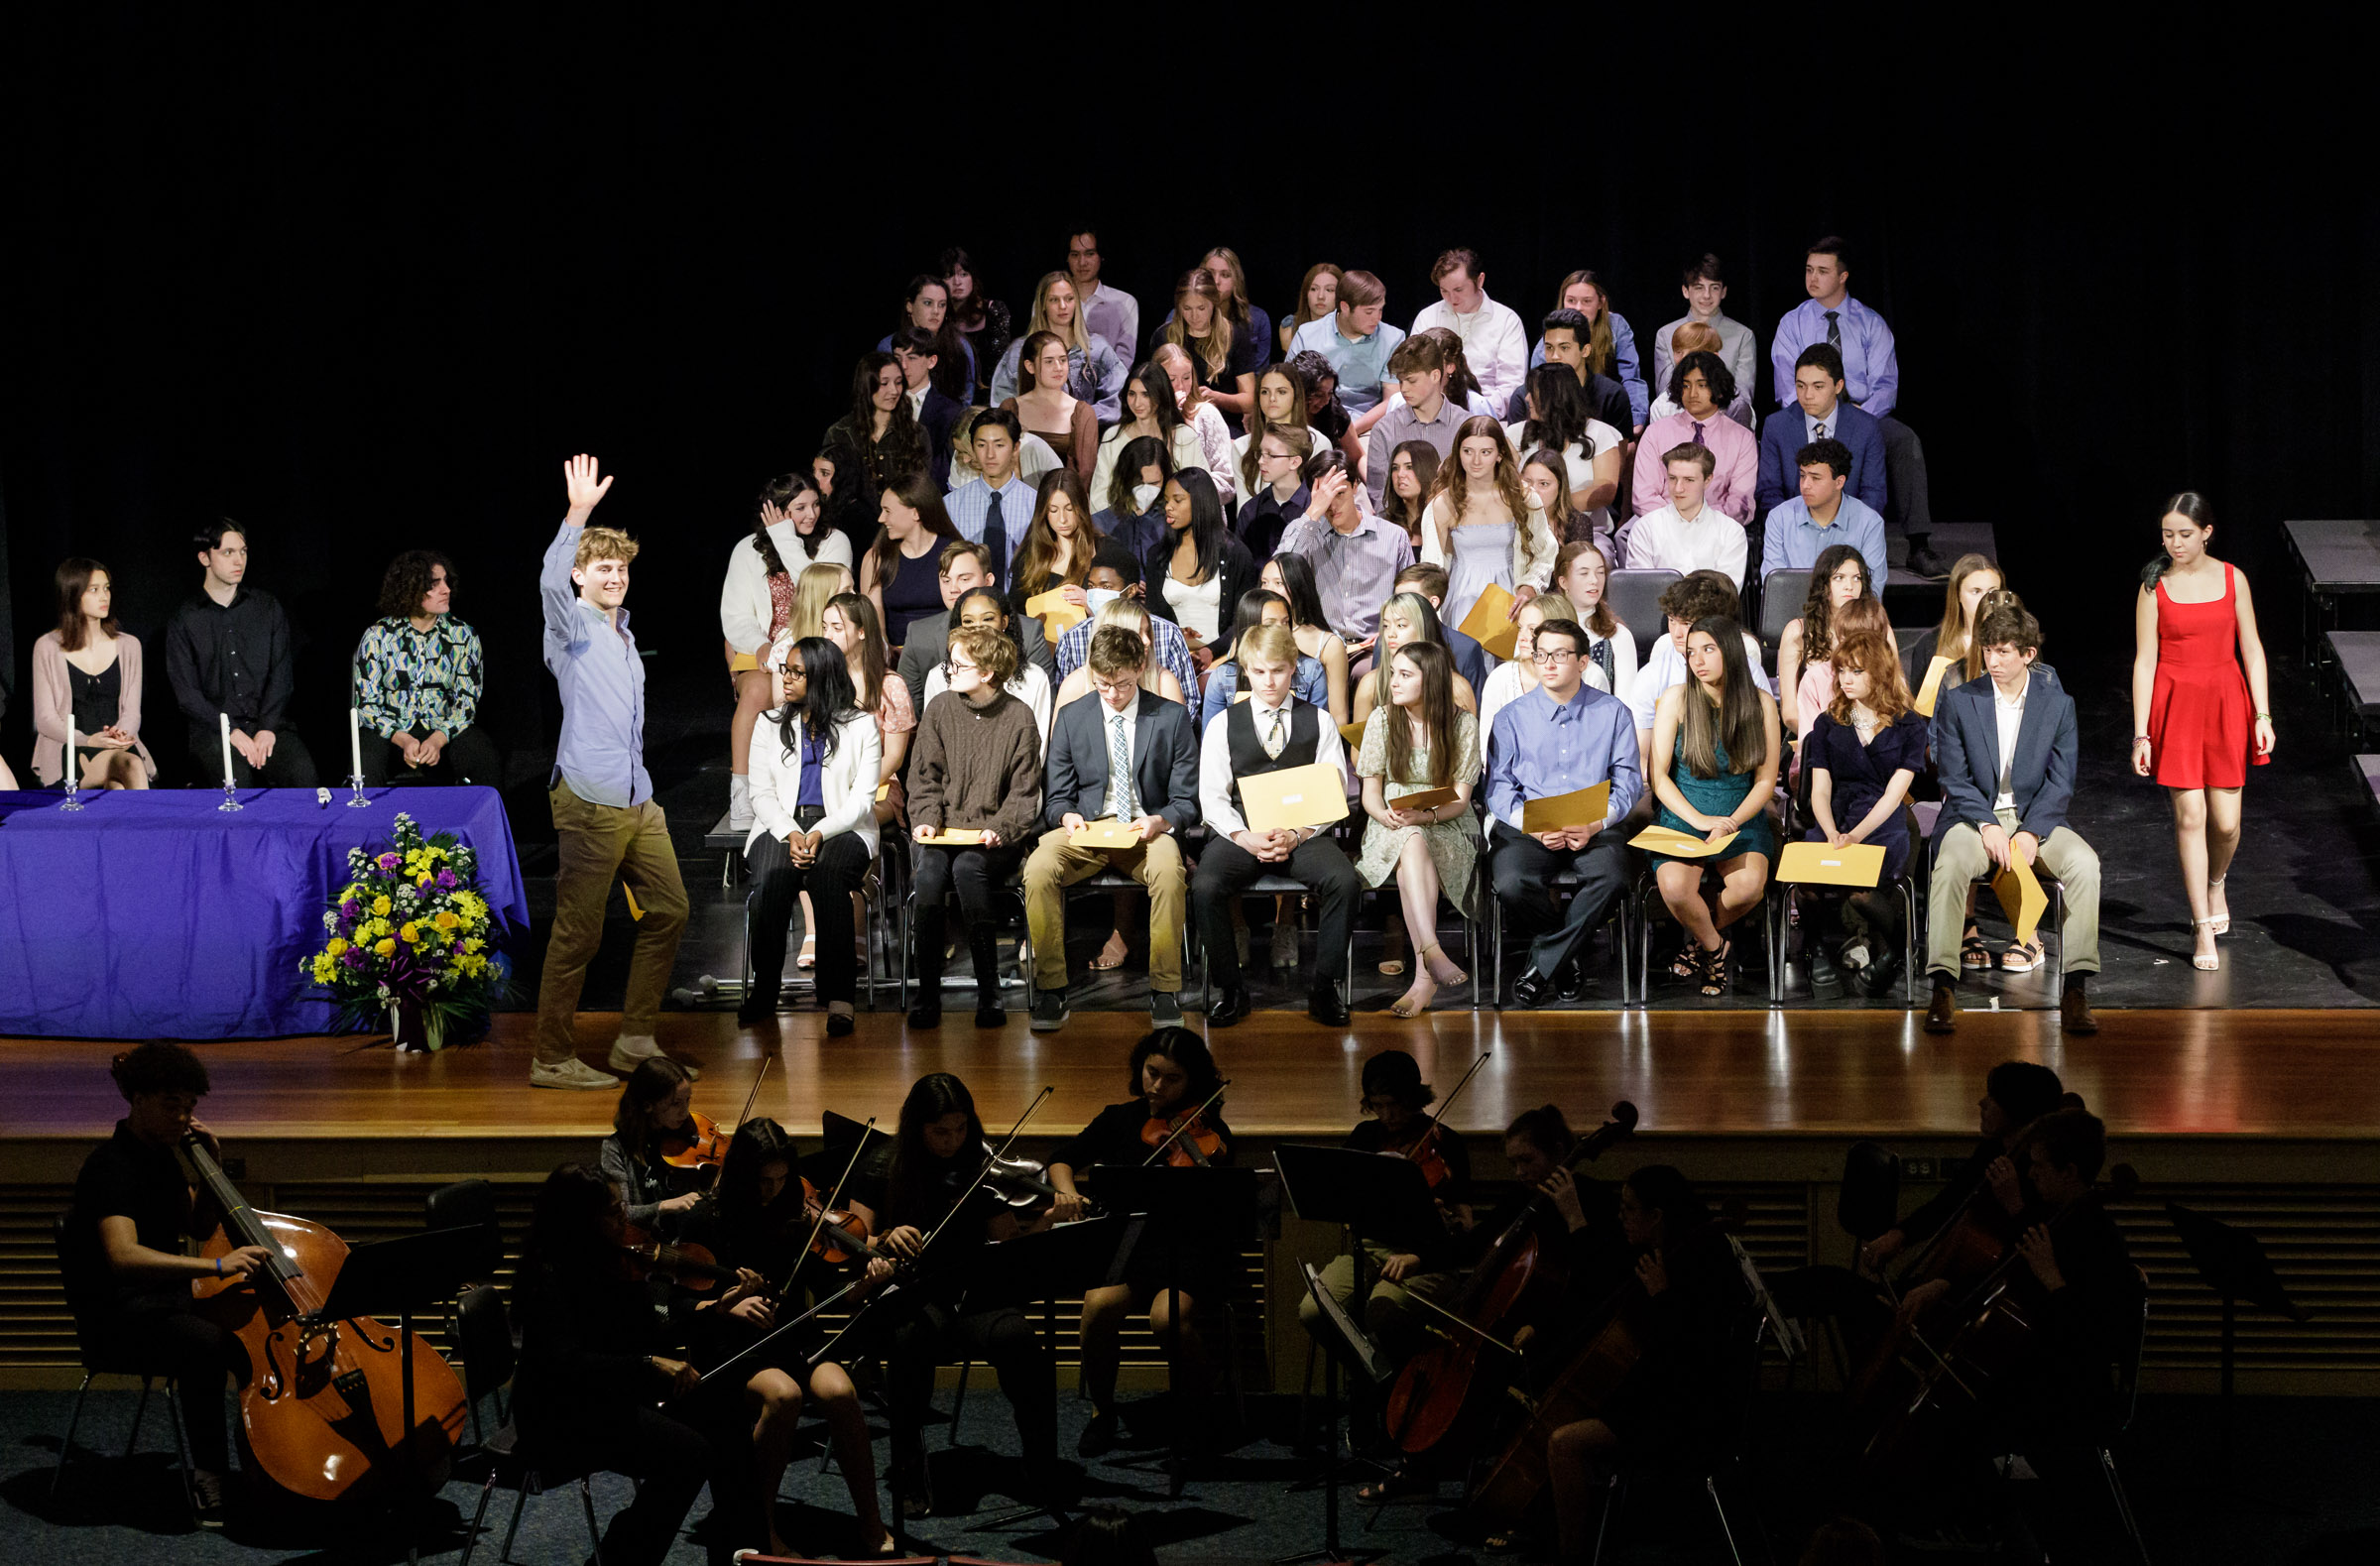 WVHS National Honor Society Induction Ceremony